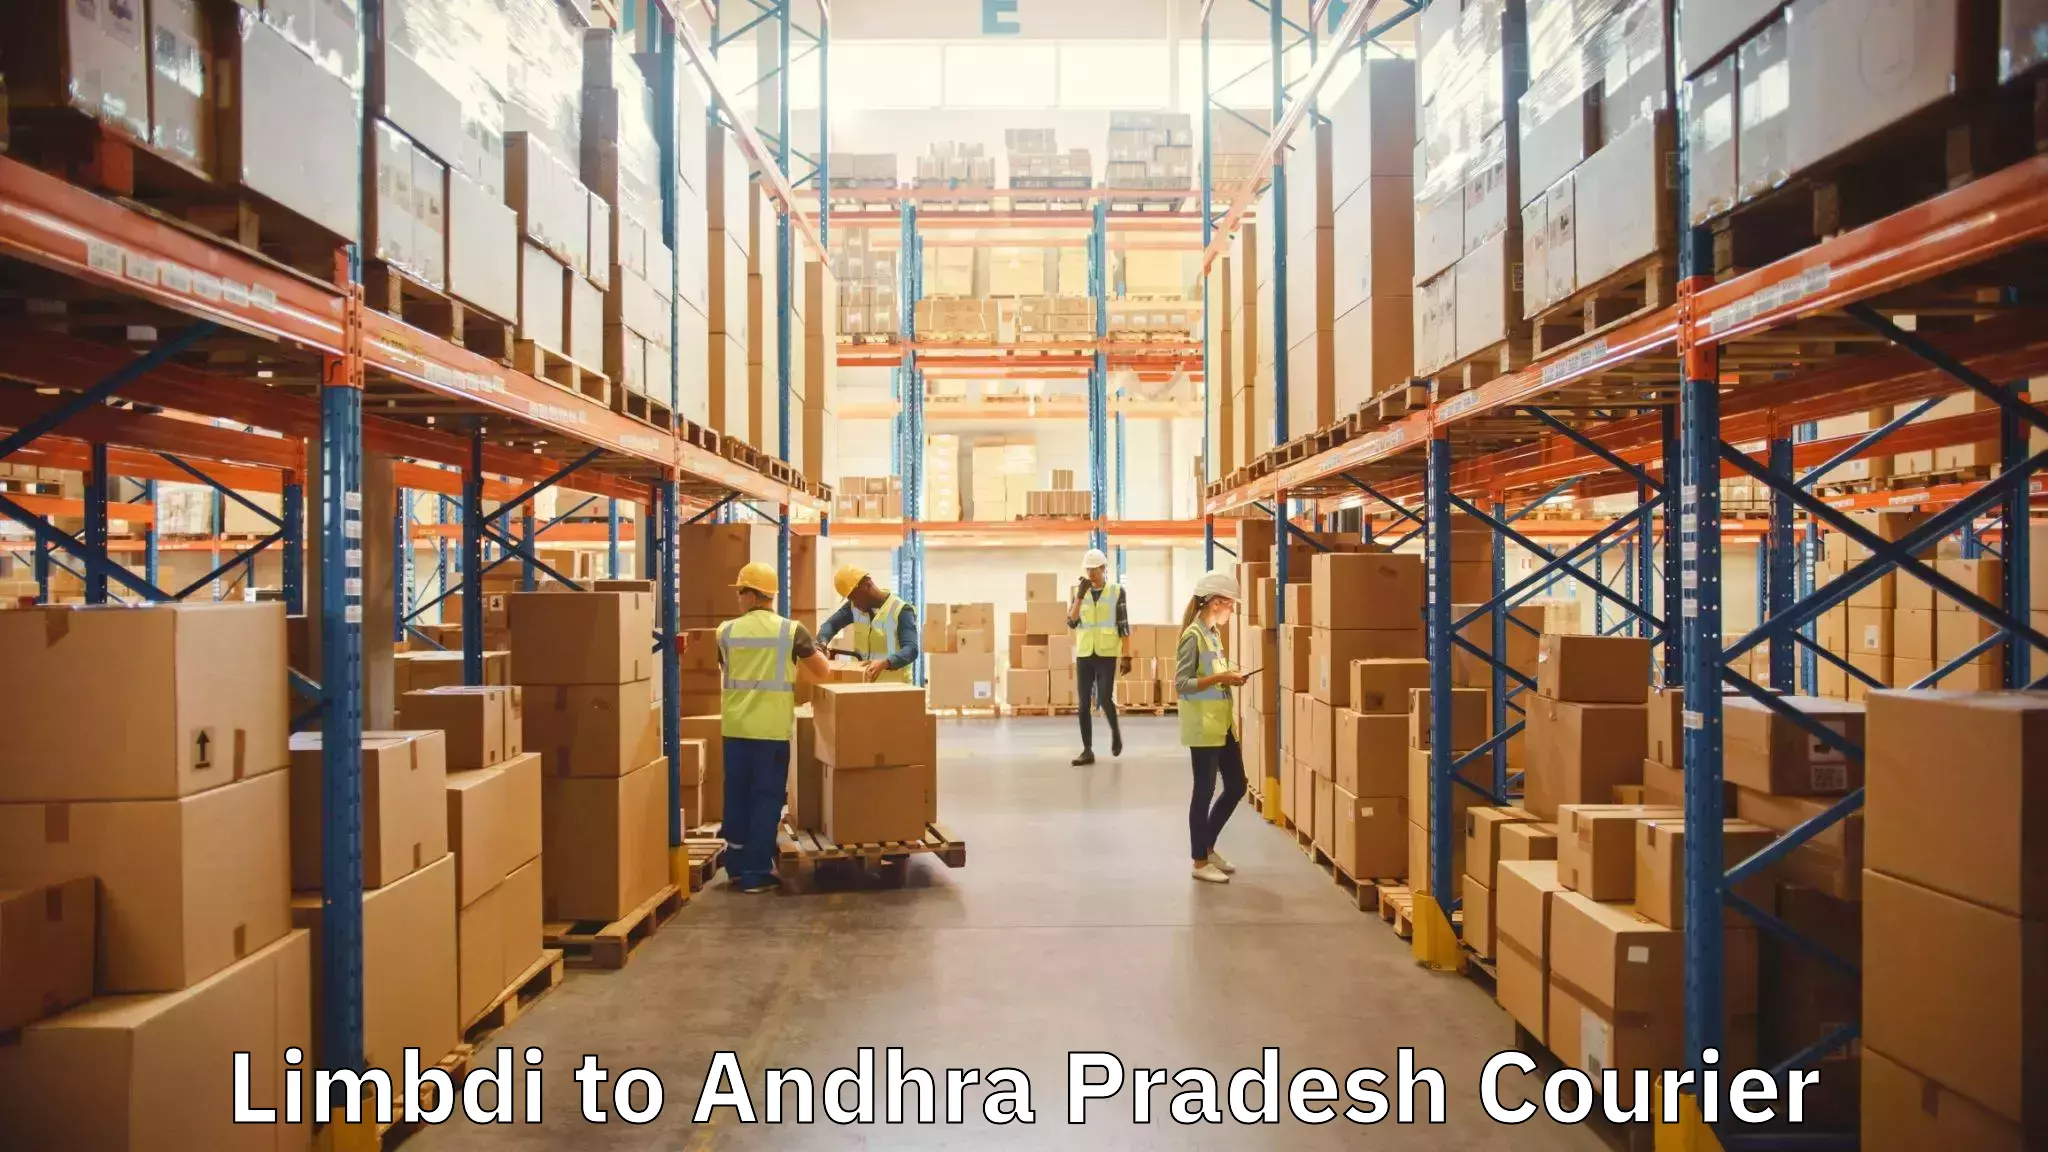 Quality relocation services in Limbdi to Changaroth